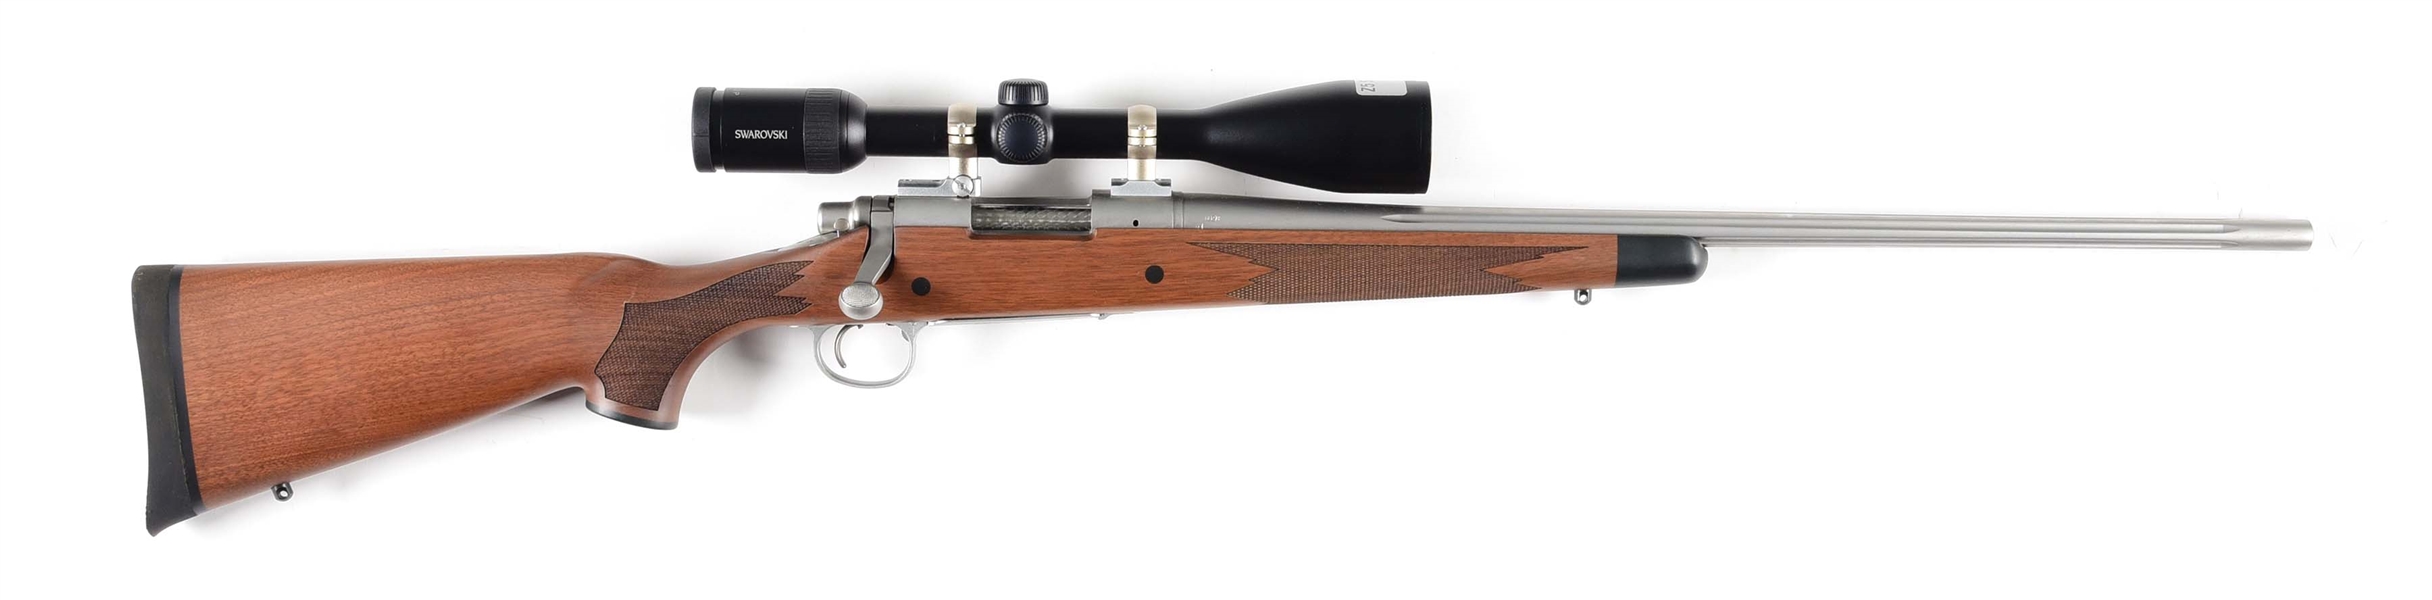 (M) REMINGTON 700 LIMITED BOLT ACTION RIFLE WITH SCOPE.